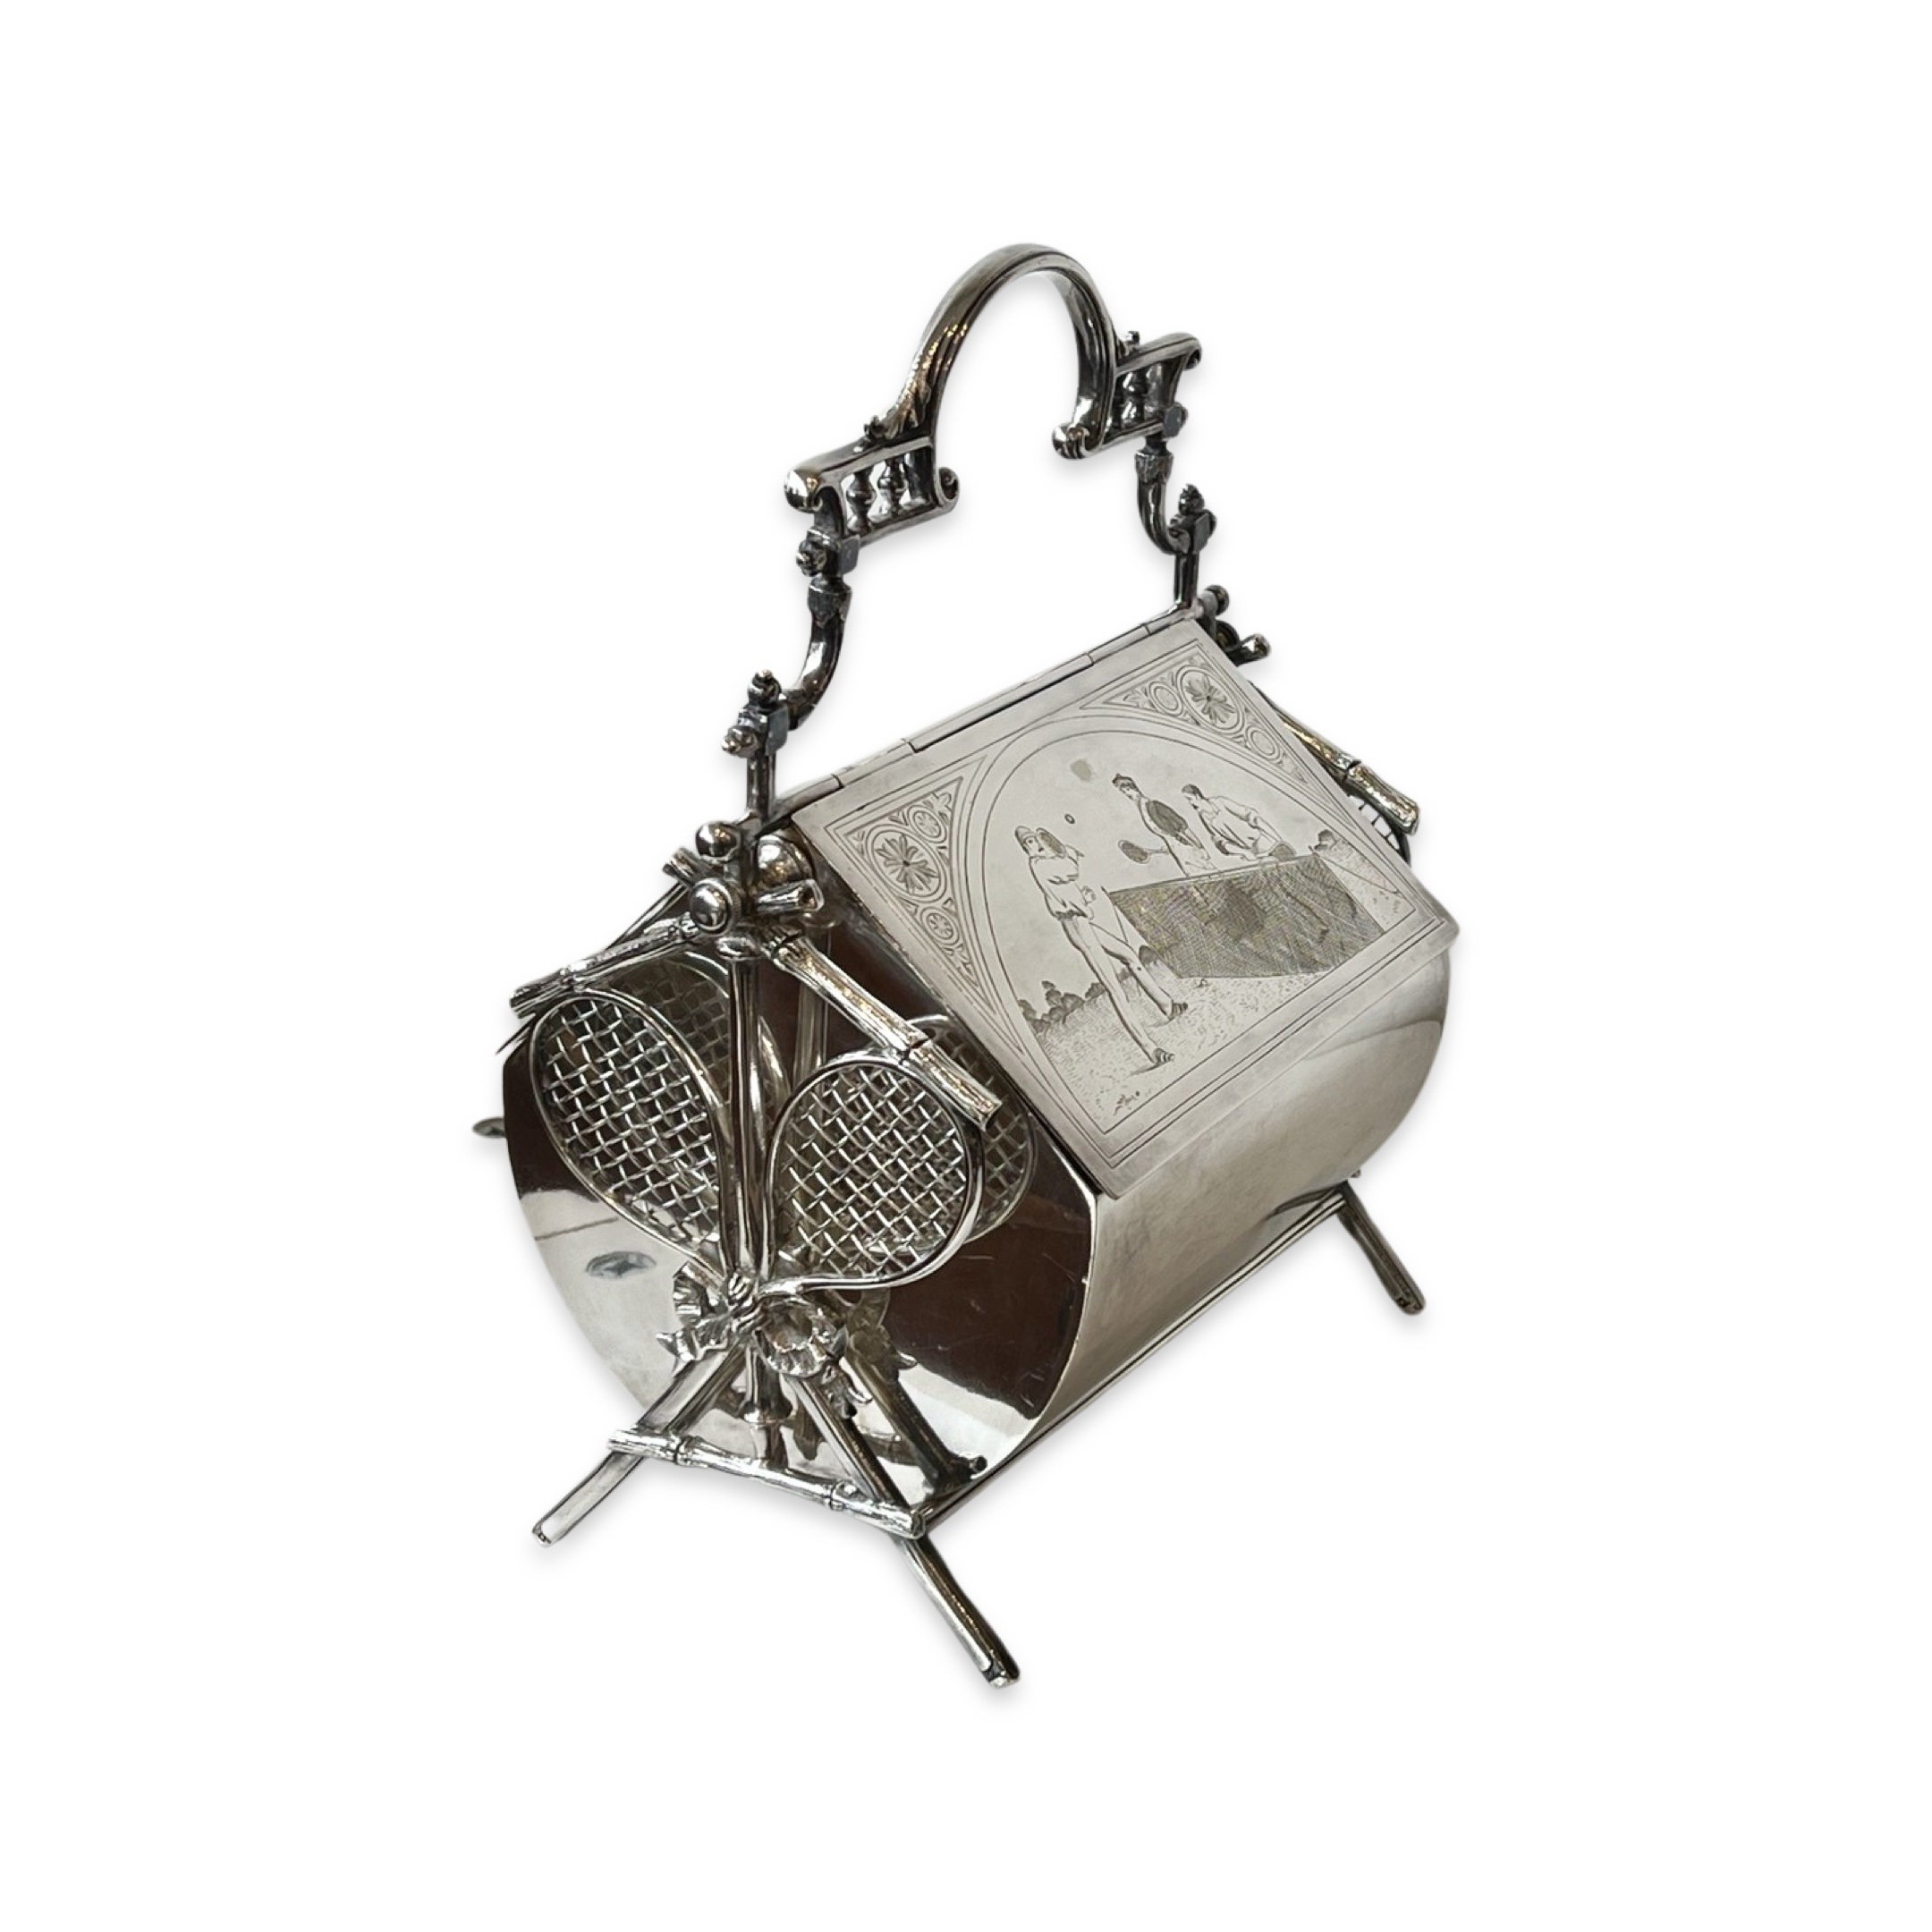 A RARE EARLY 20TH CENTURY NOVELTY SILVER PLATED 'TENNIS' BISCUIT BOX C. 1900 - Image 4 of 7